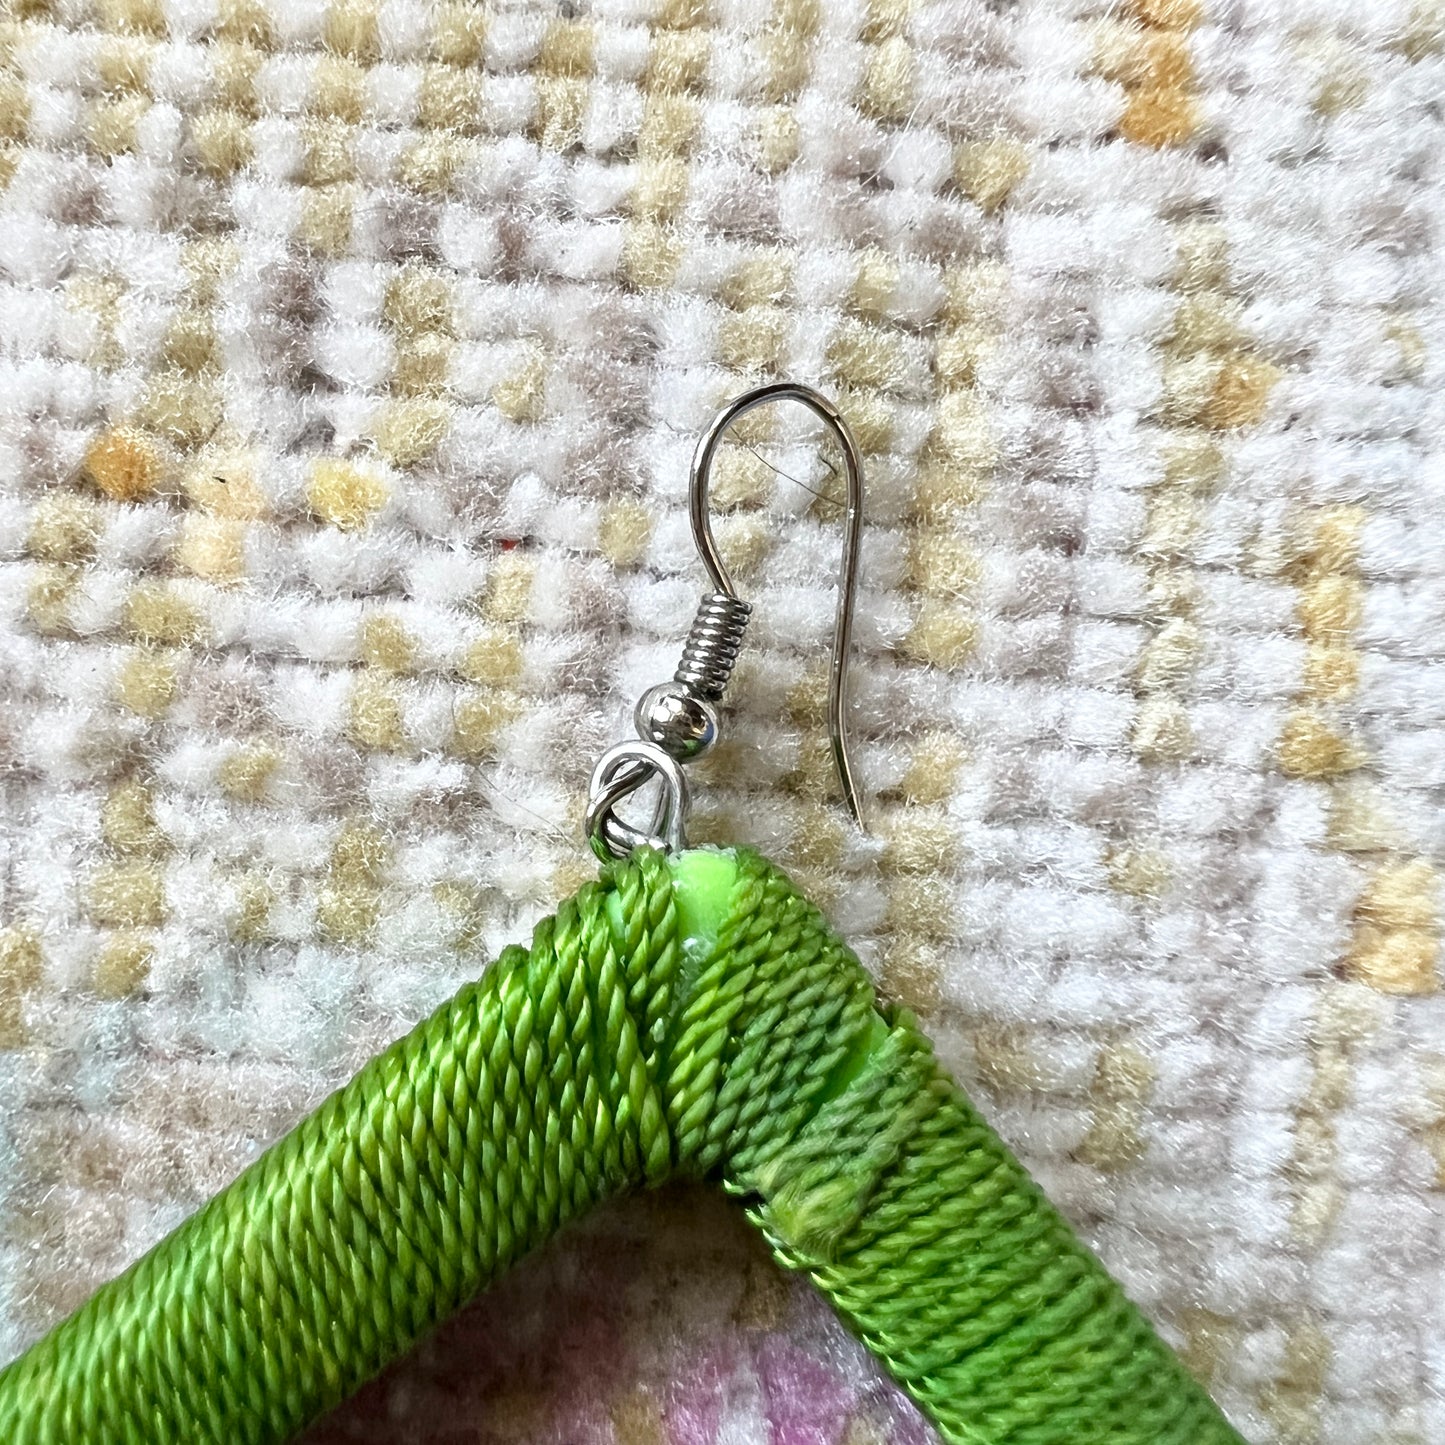 [AS-IS] 1960s Style Green Square Earrings